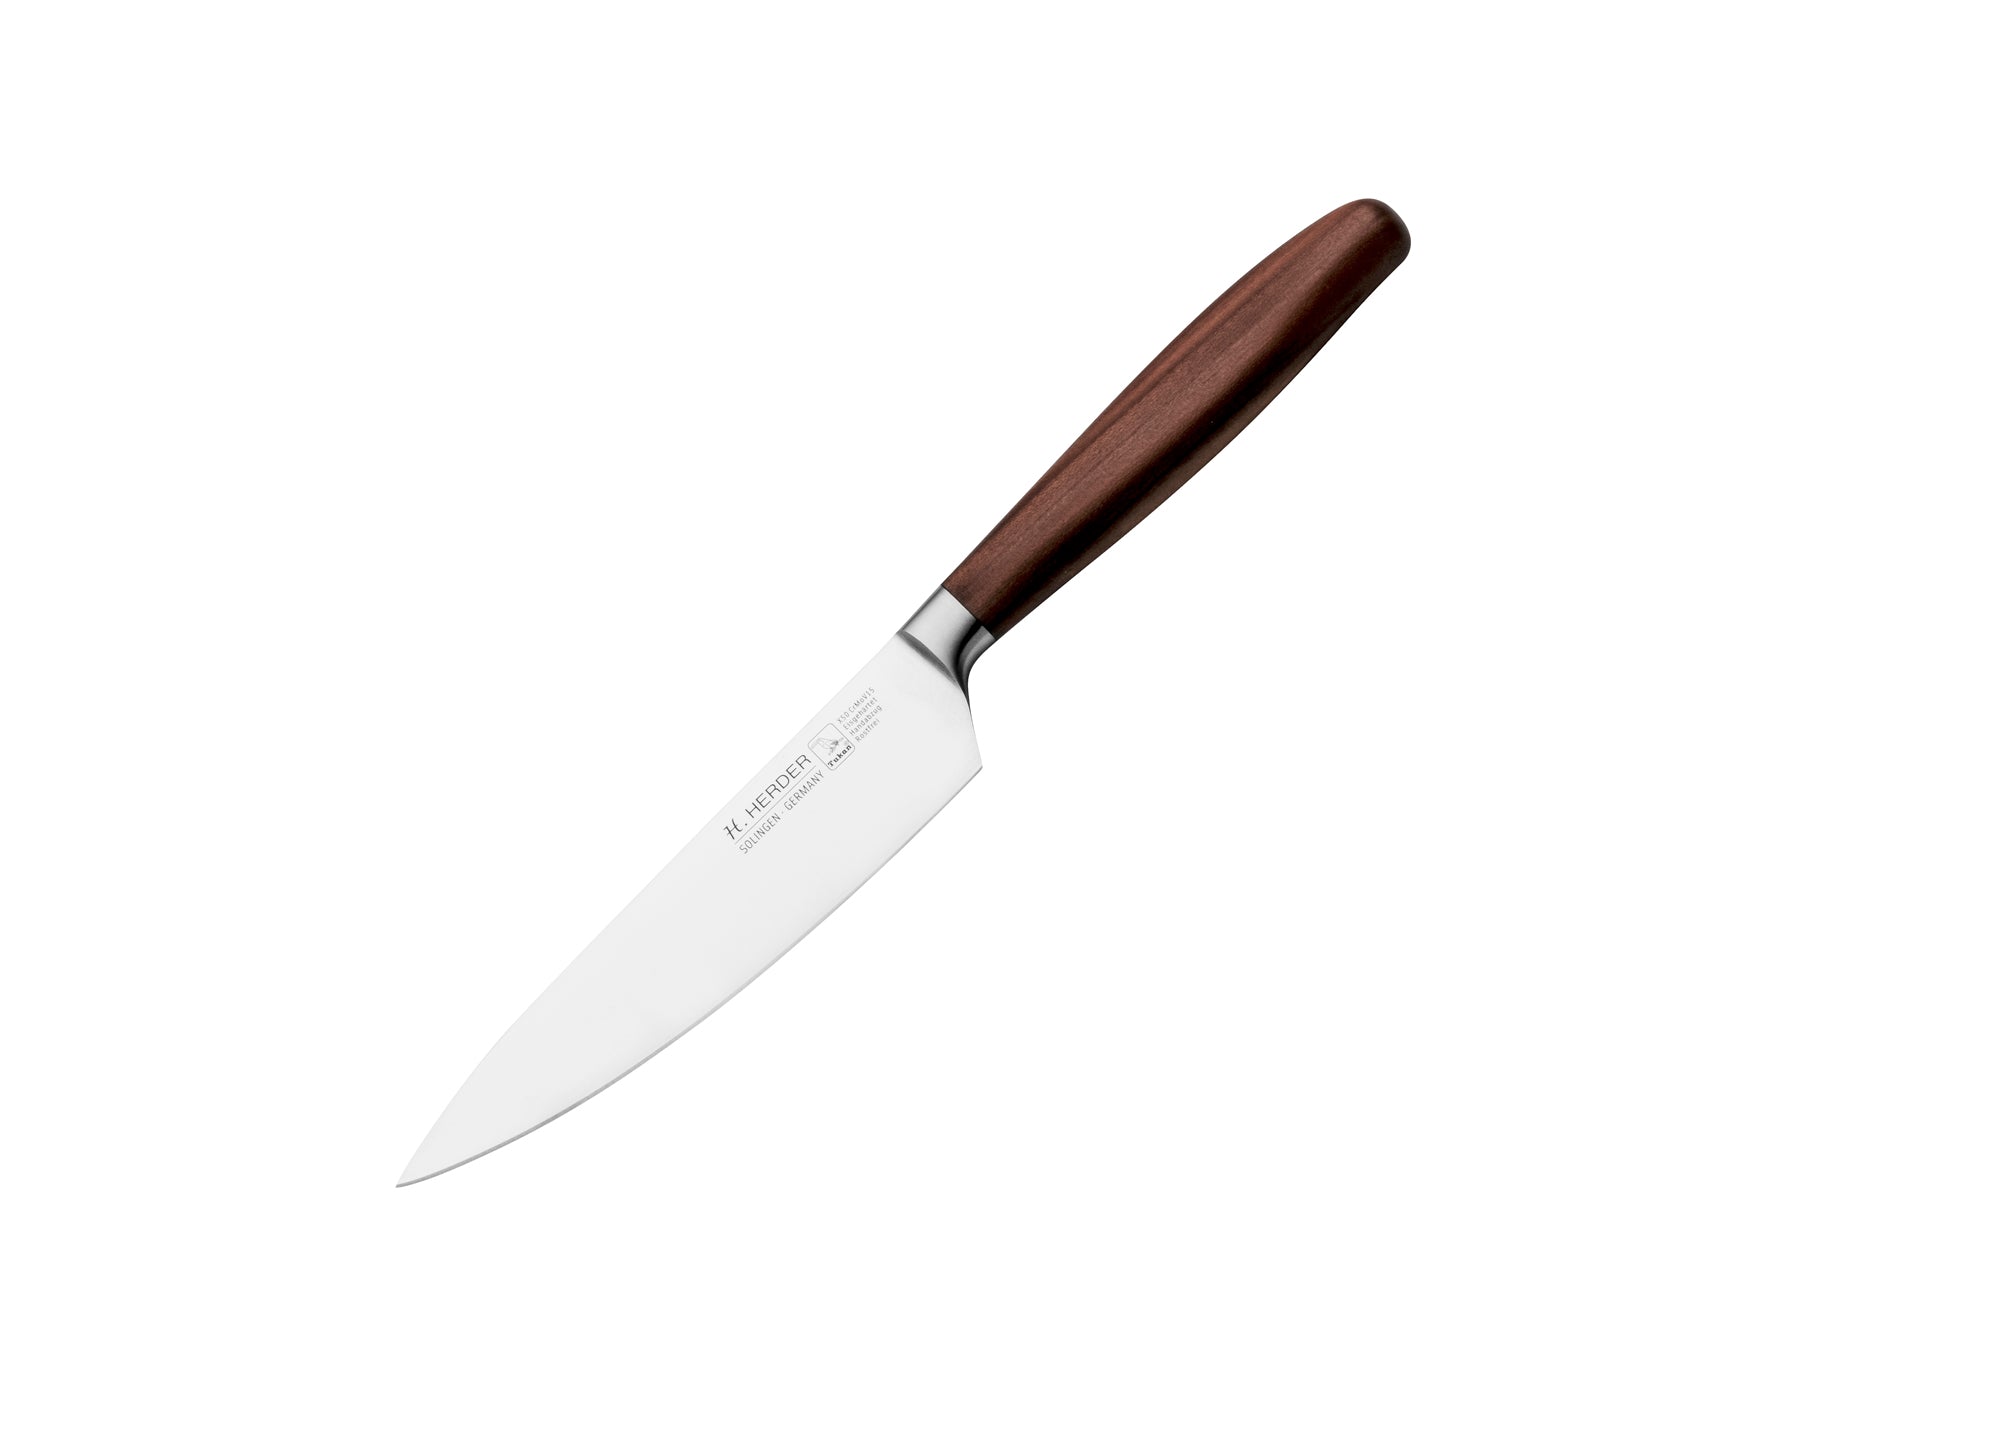 Paring knife Eterno, plum wood, blade length 7cm, forged, curved - Germany  Solingen